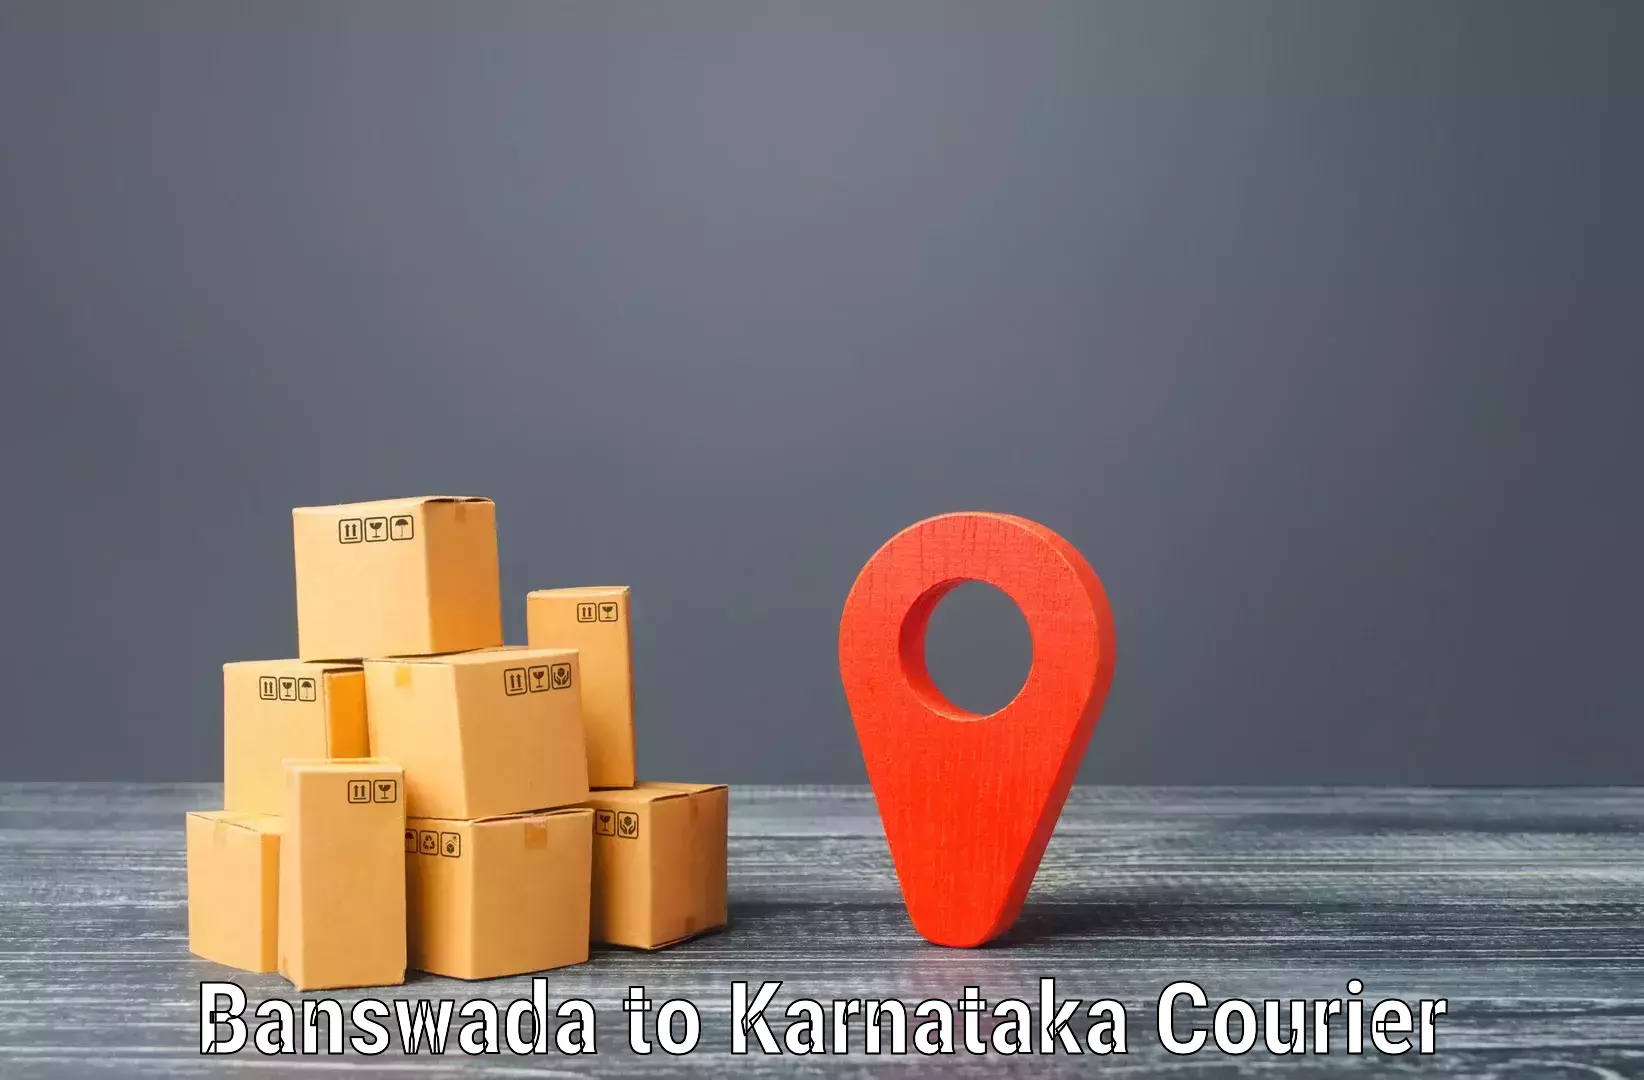 Global courier networks Banswada to Mangalore Port